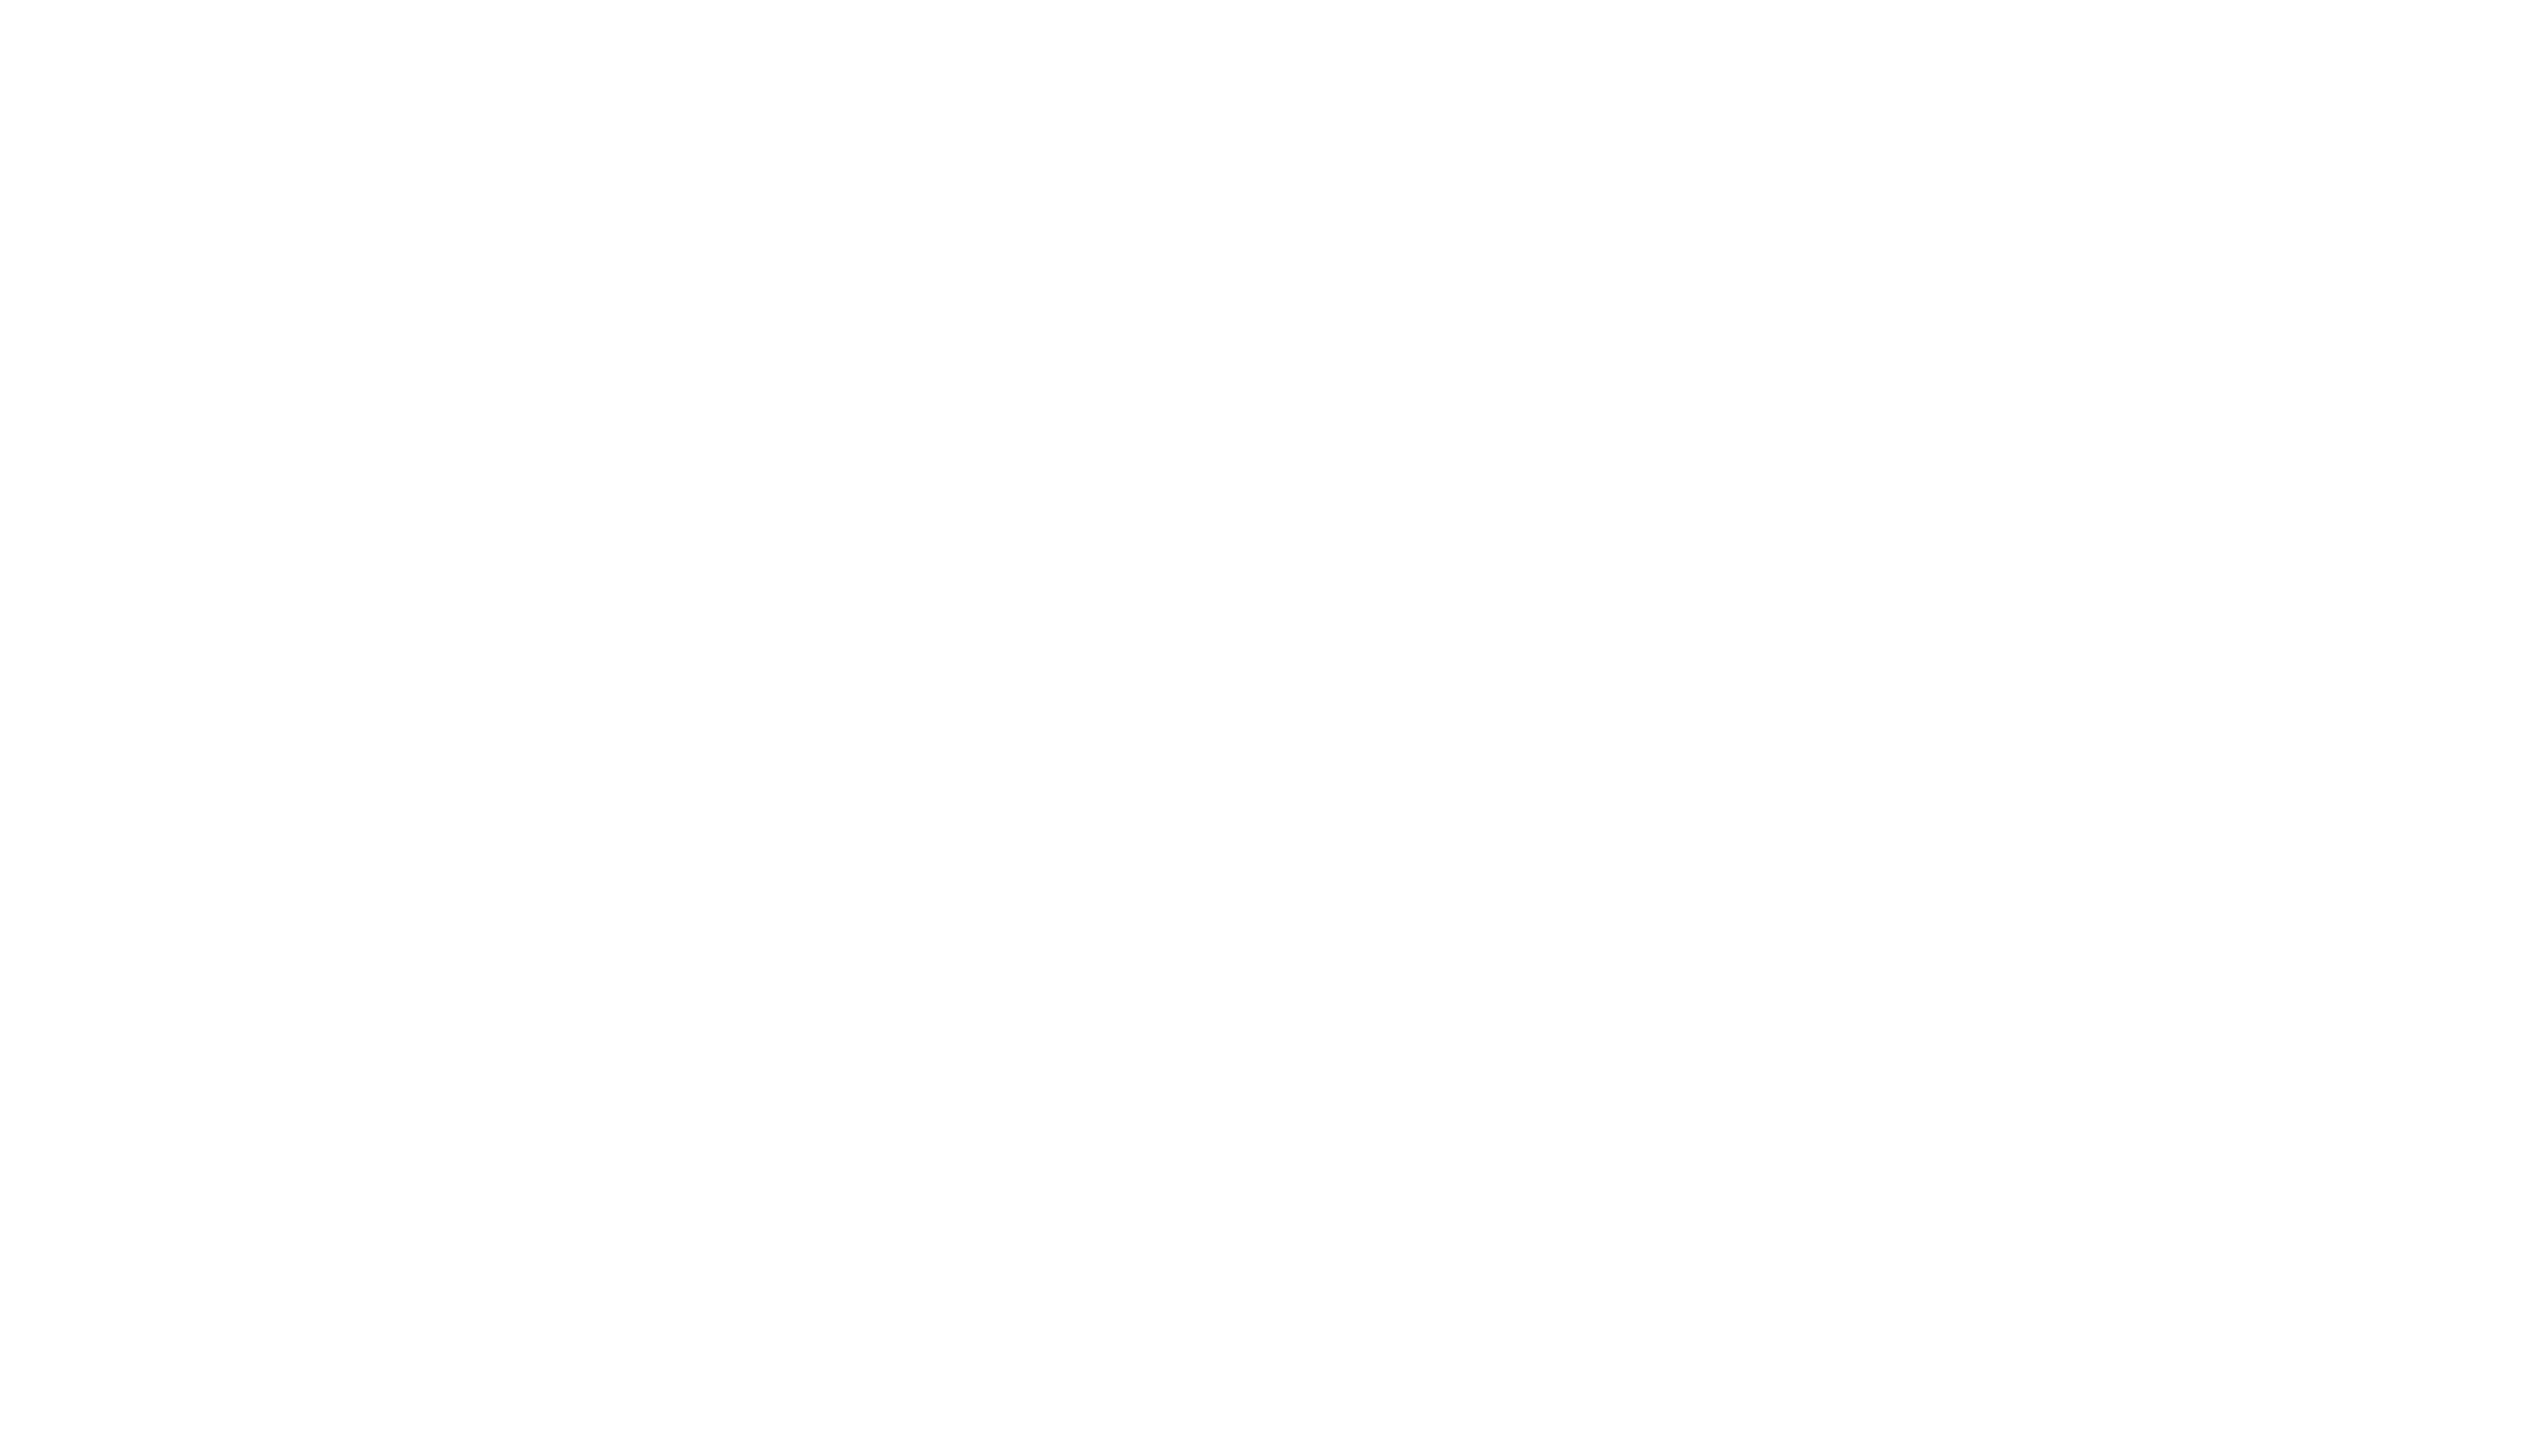 Hong Kong Association for Pictures and Sound Production